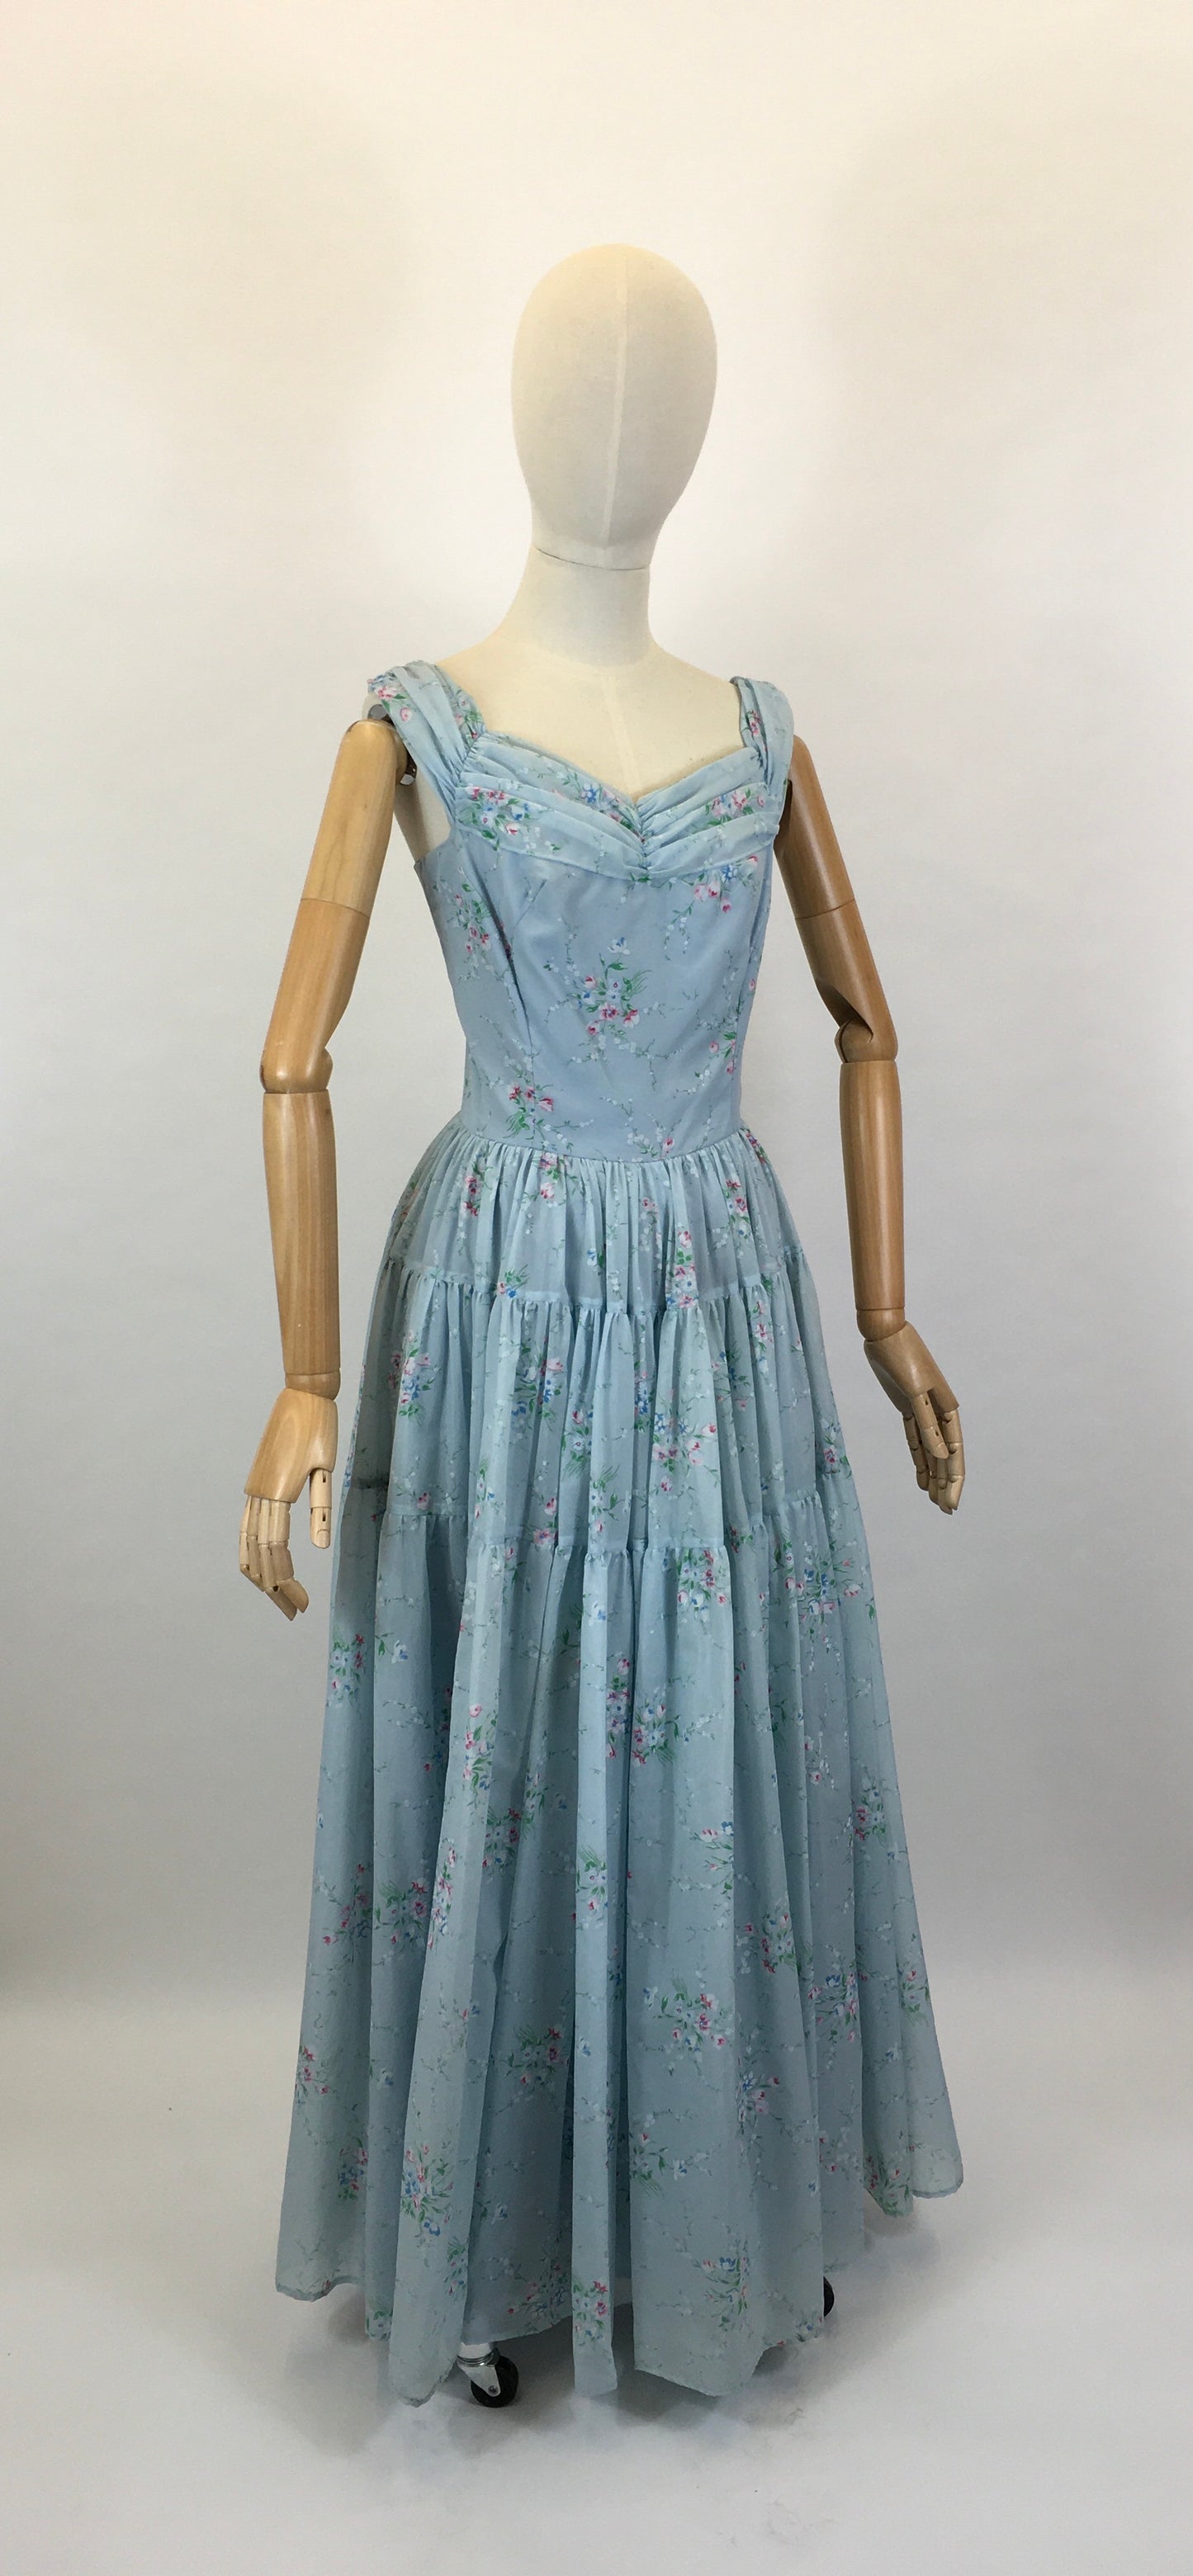 Original 1950’s Darling Full Length Prom Dress - In A Lovely Powder Blue Floral Tulle.